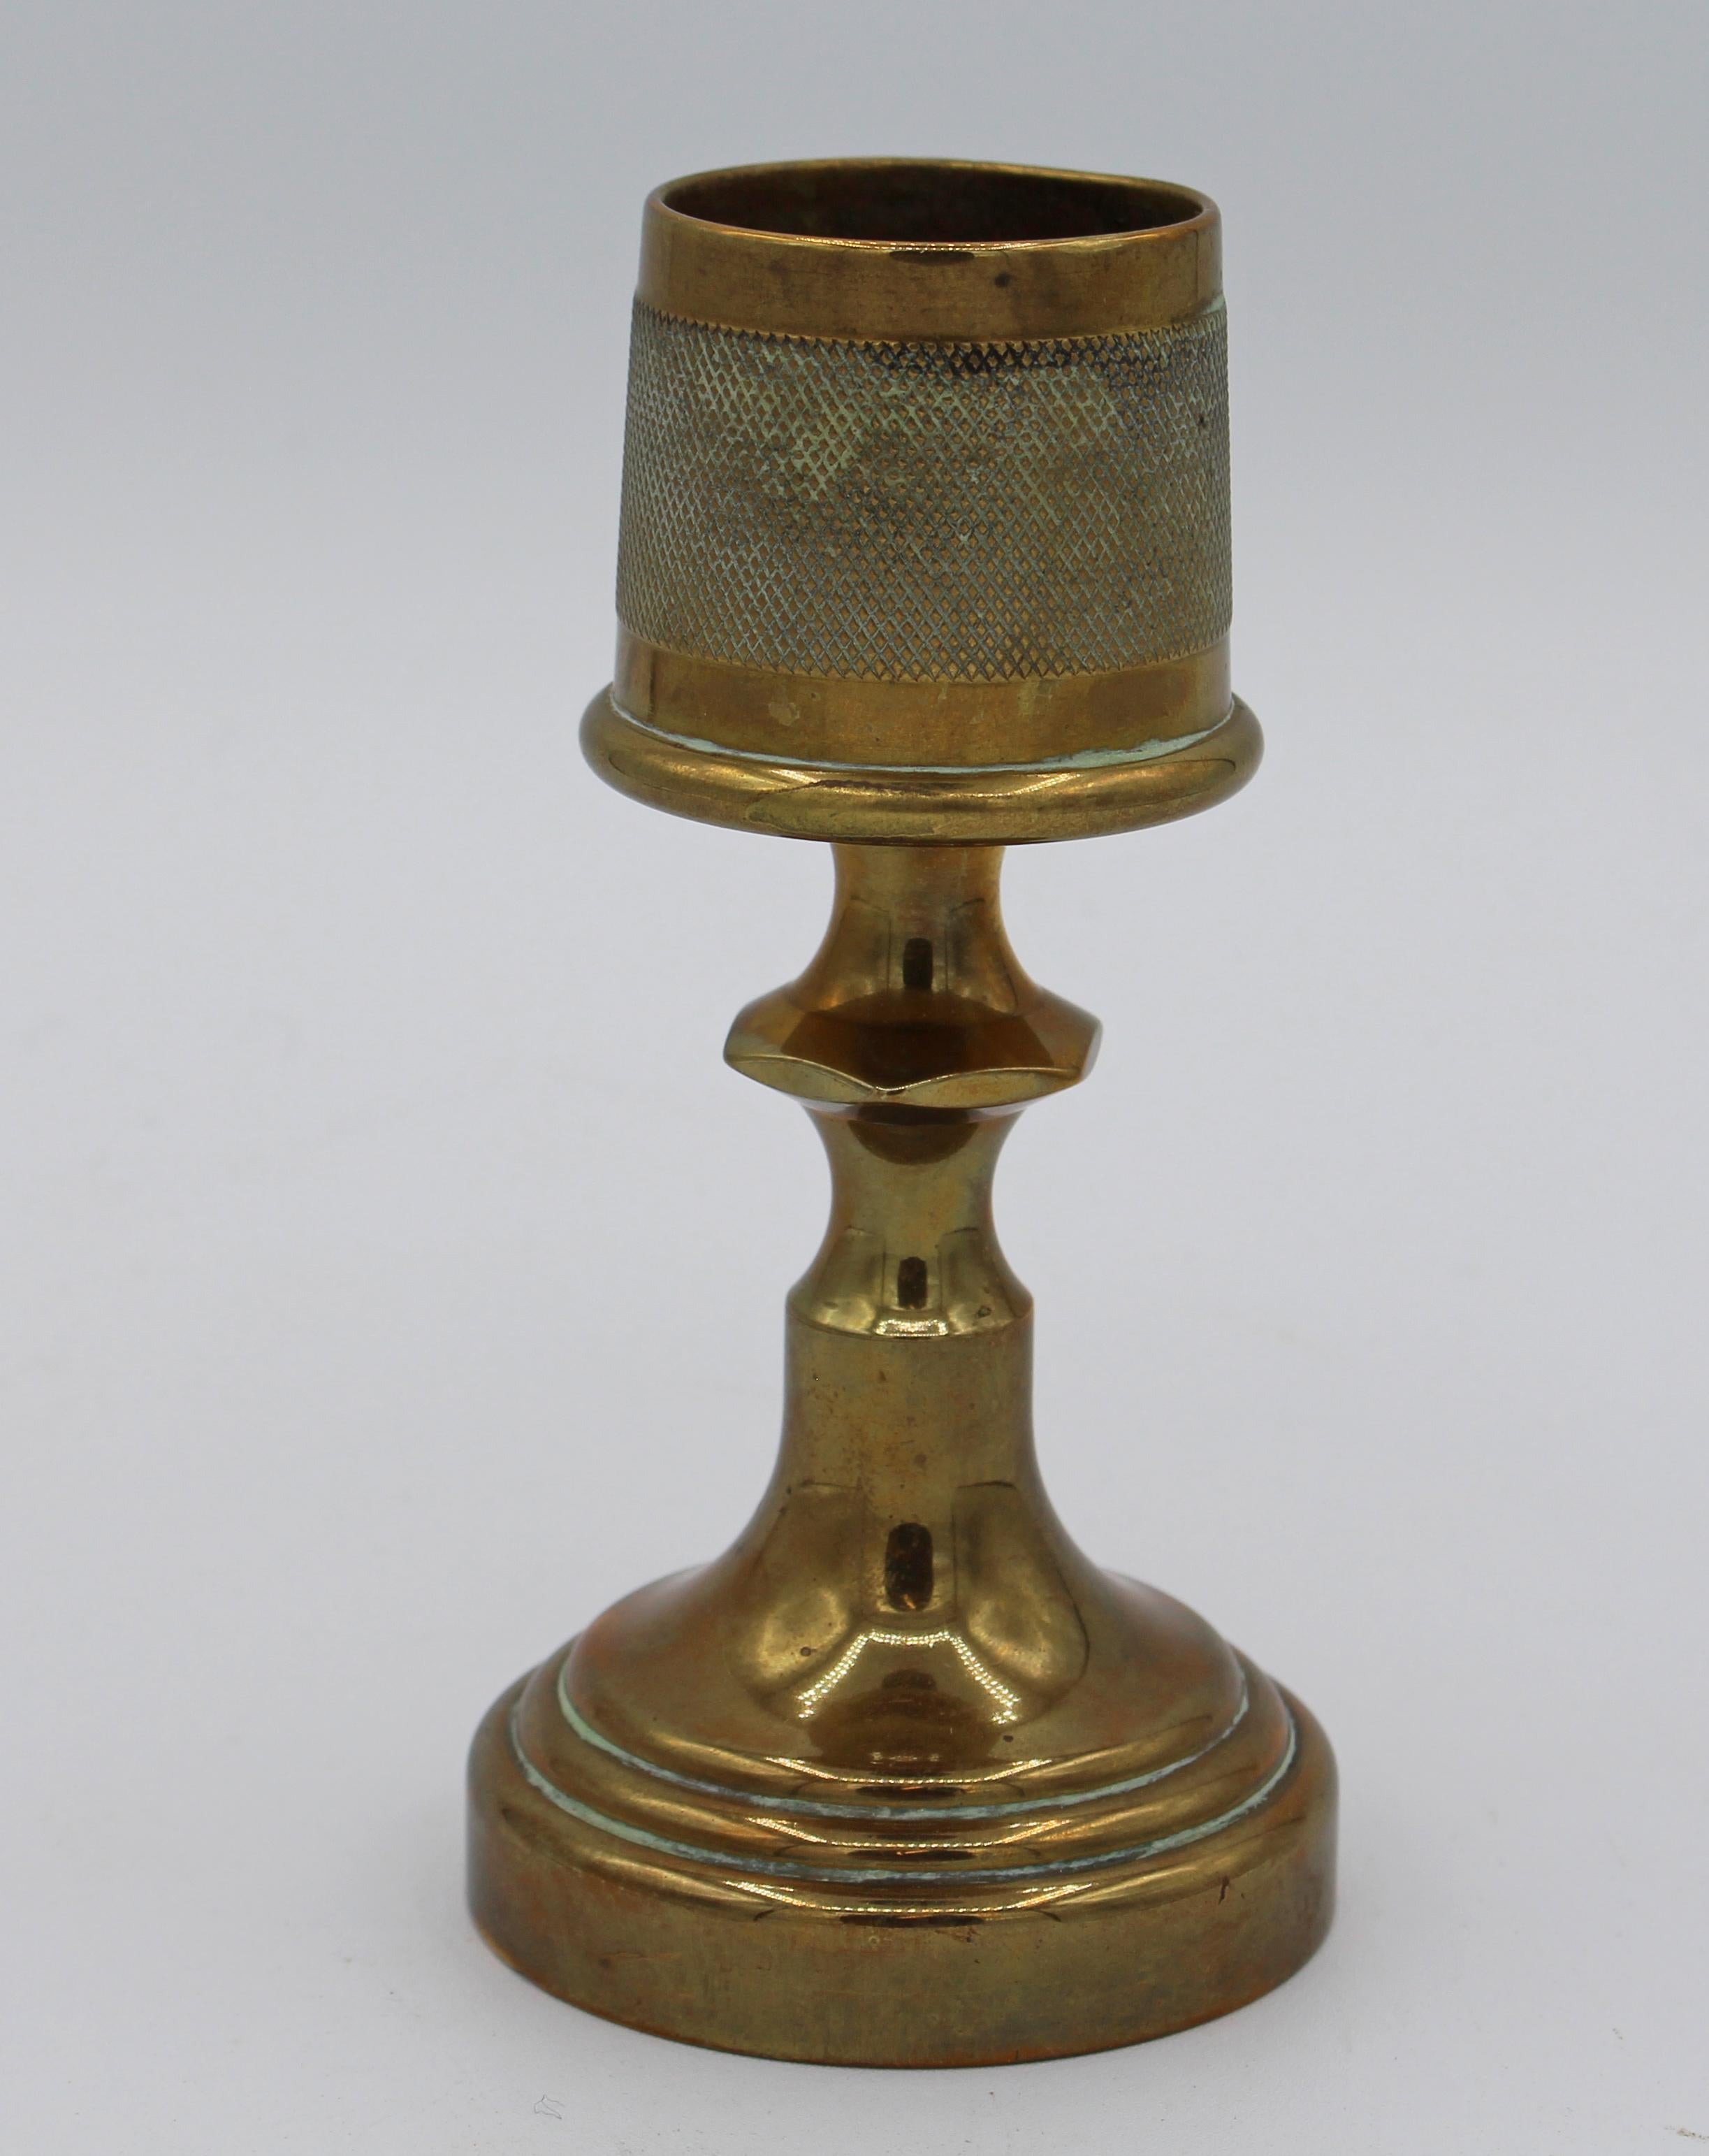 A handsome brass match strike & holder, Edwardian, c. 1900, English. Heavily weighted for stability on a gentleman's desk or in a London gentleman's club. 4 7/8